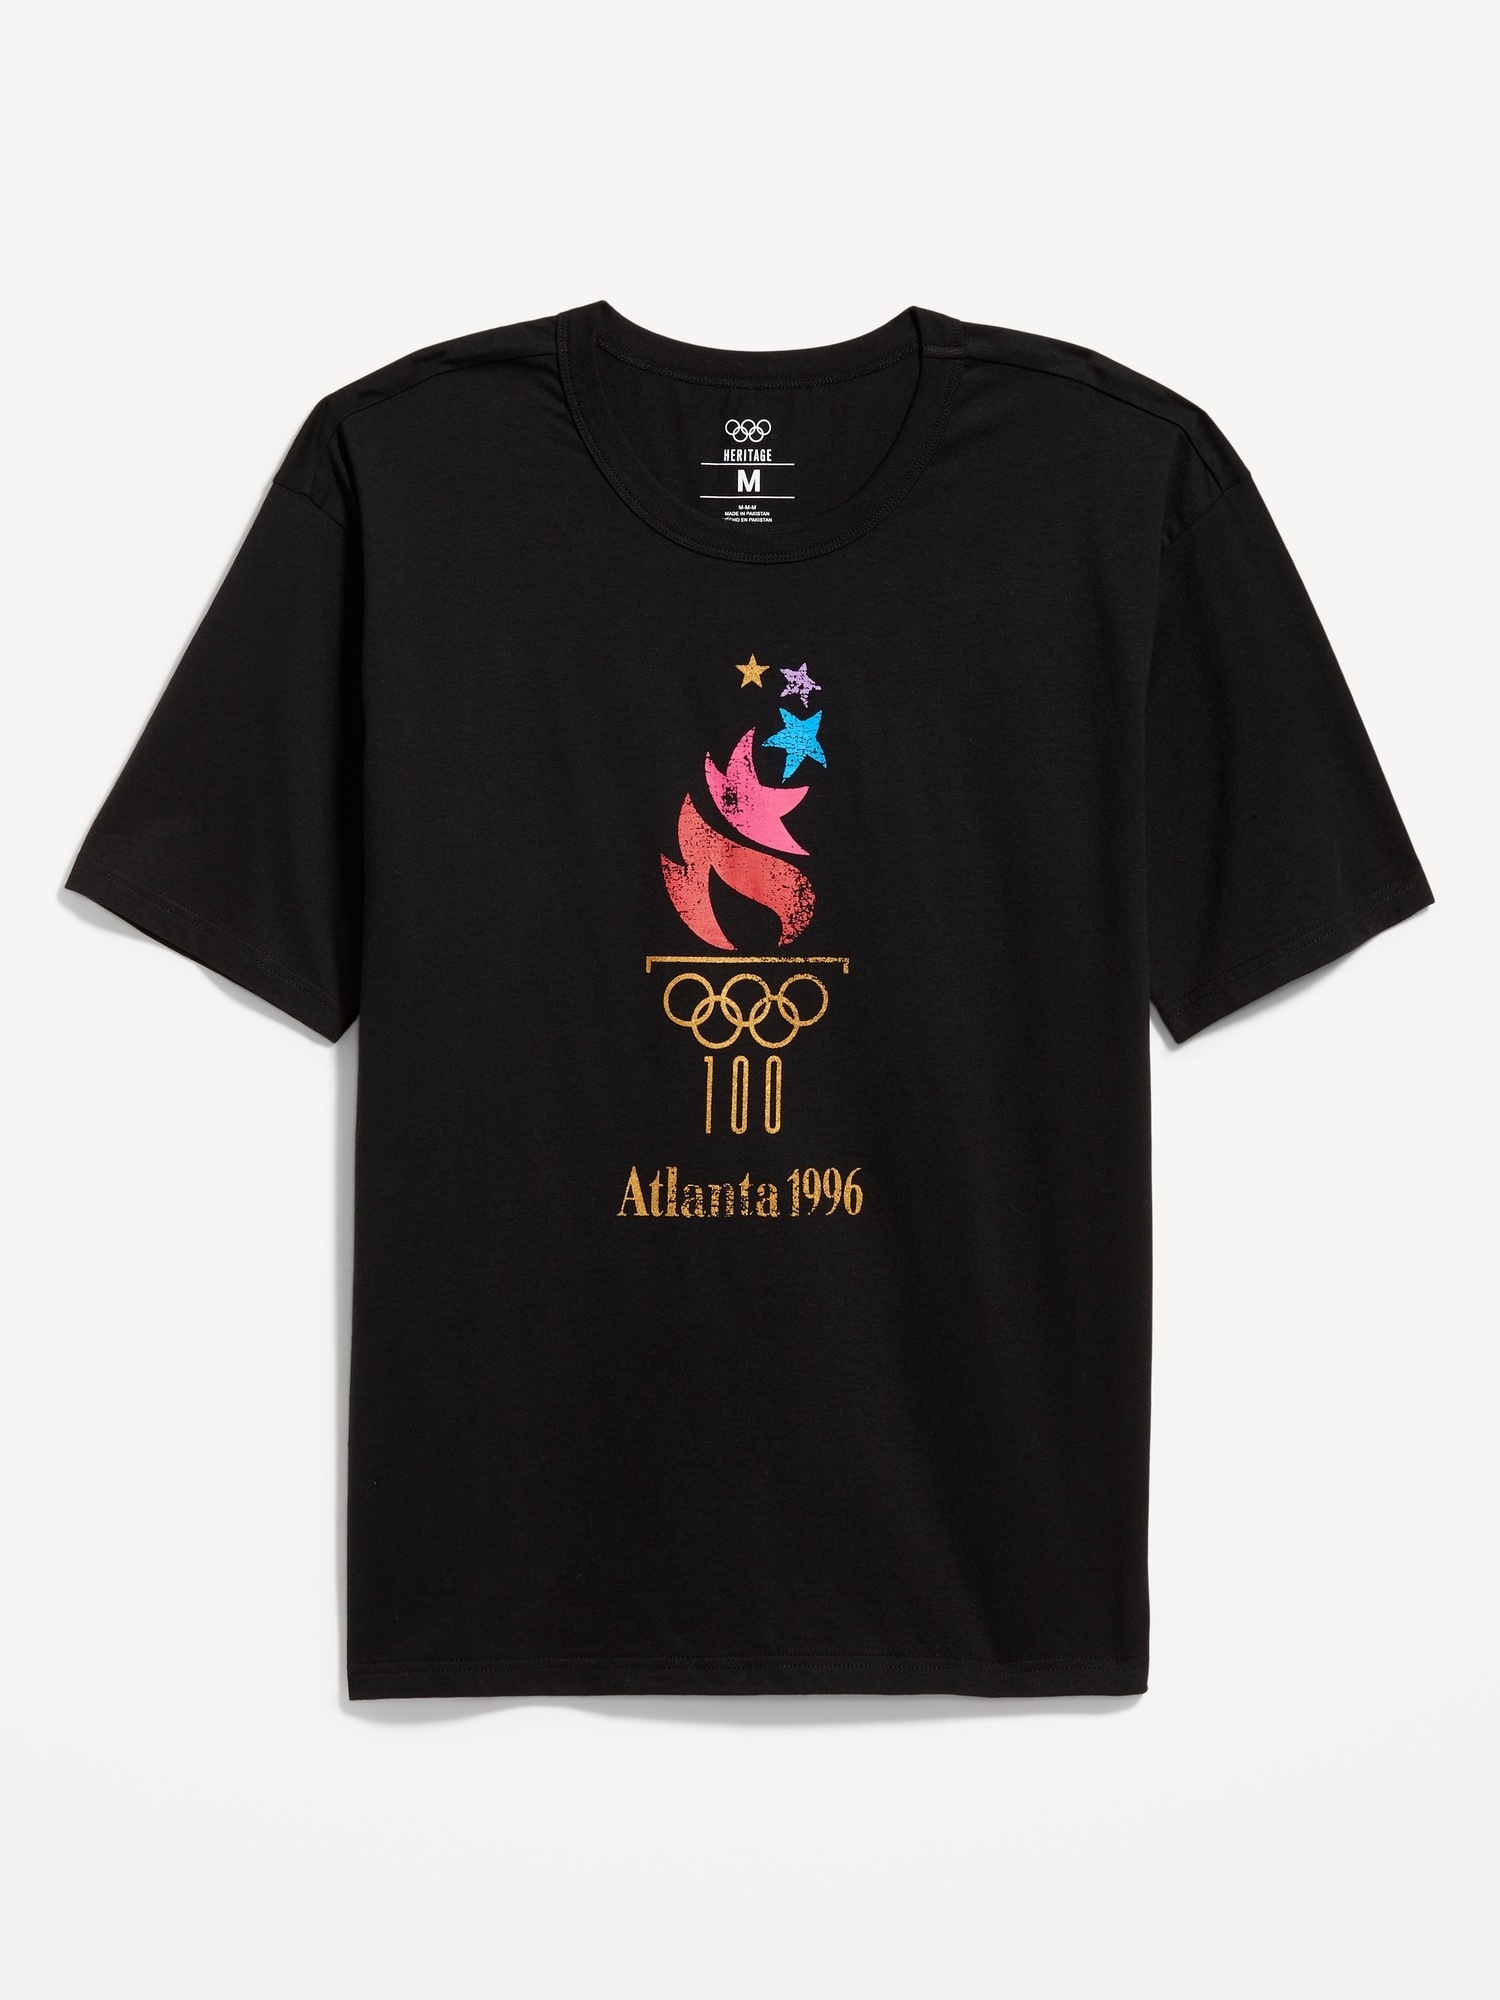 Team USA© Gender-Neutral Loose T-Shirt for Adults